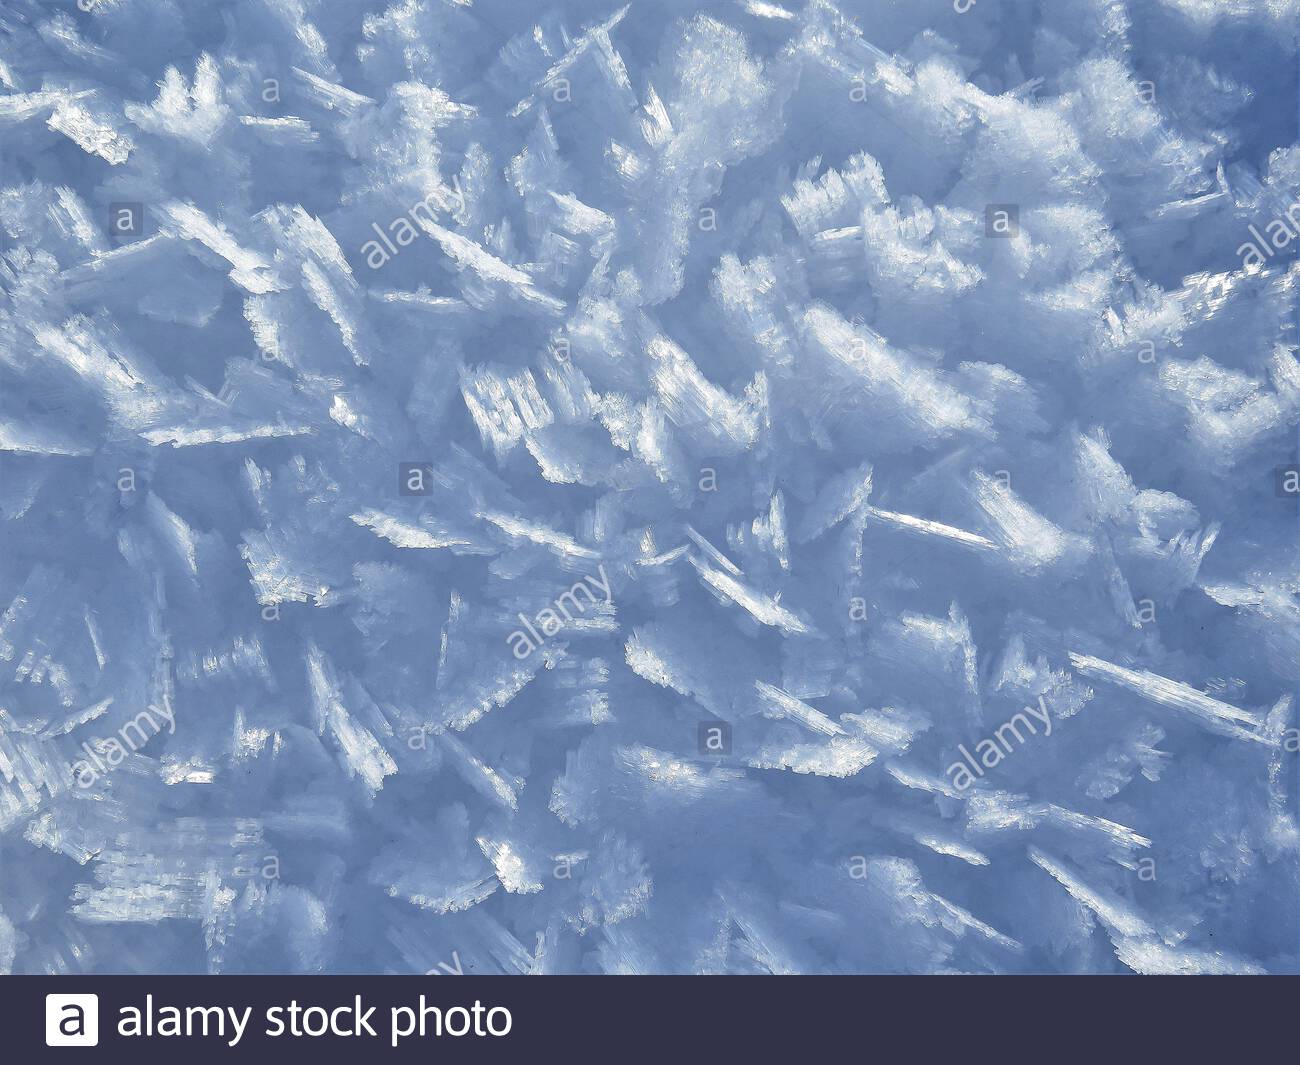 A Closeup Shot Of White Snow Crystals During Winter Good For